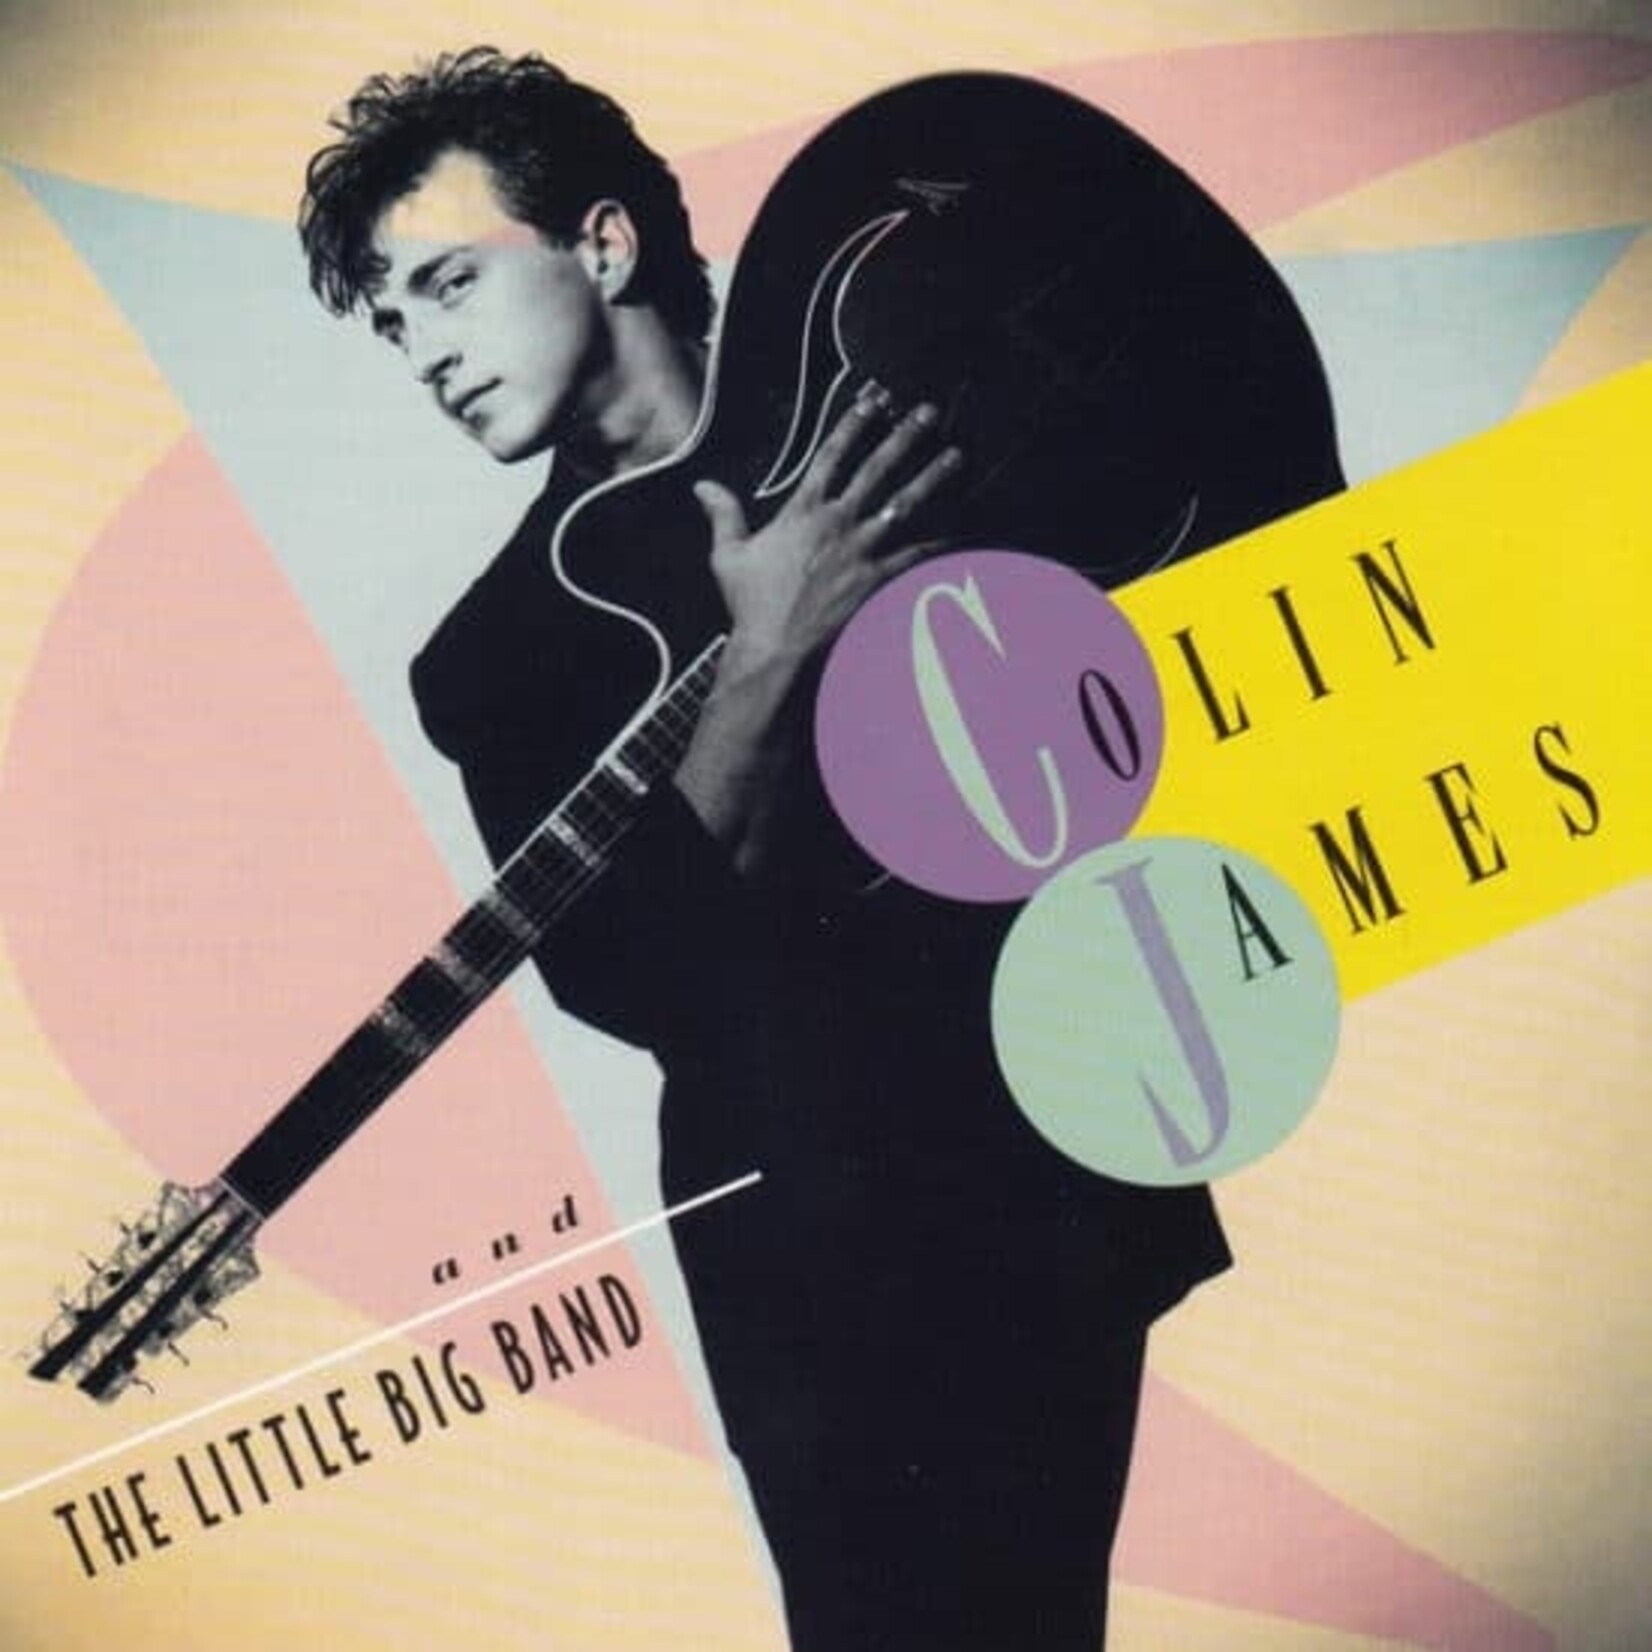 Colin James - Colin James And The Little Big Band [USED CD]